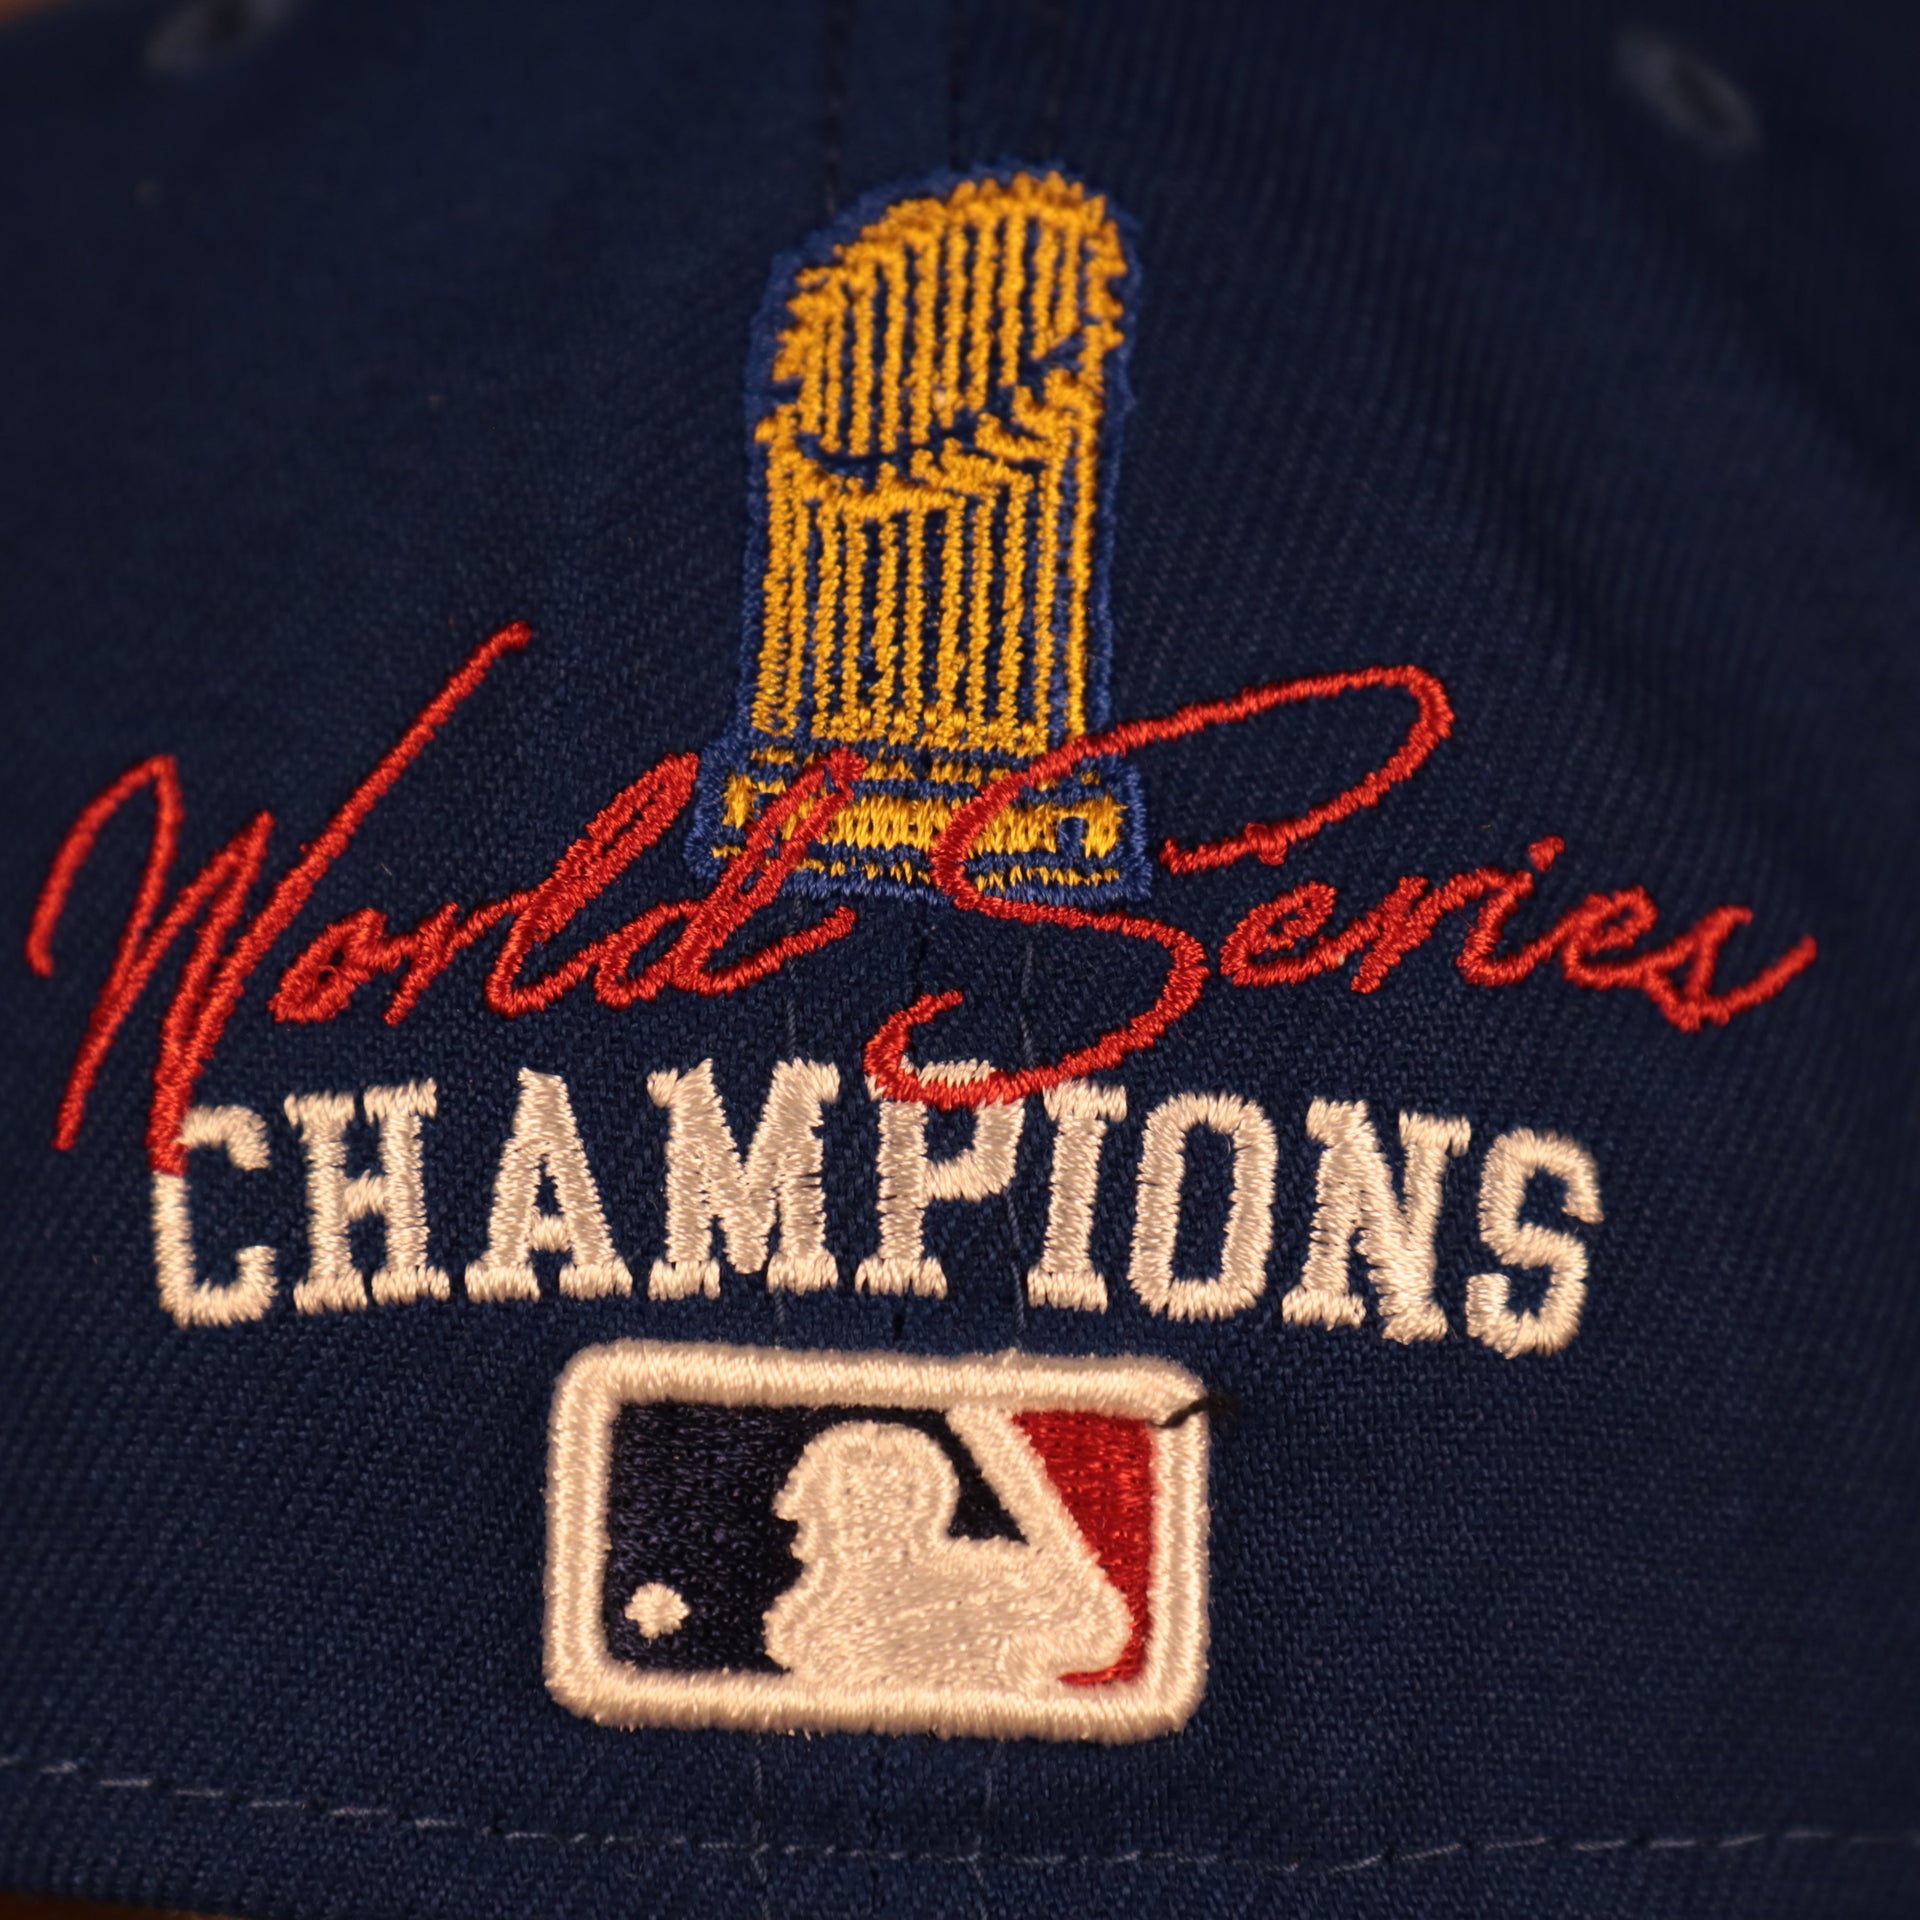 world series champs logo New York Mets Cooperstown "Championship Rings" All Over Side Patch Gray Bottom 59FIFTY Fitted Cap